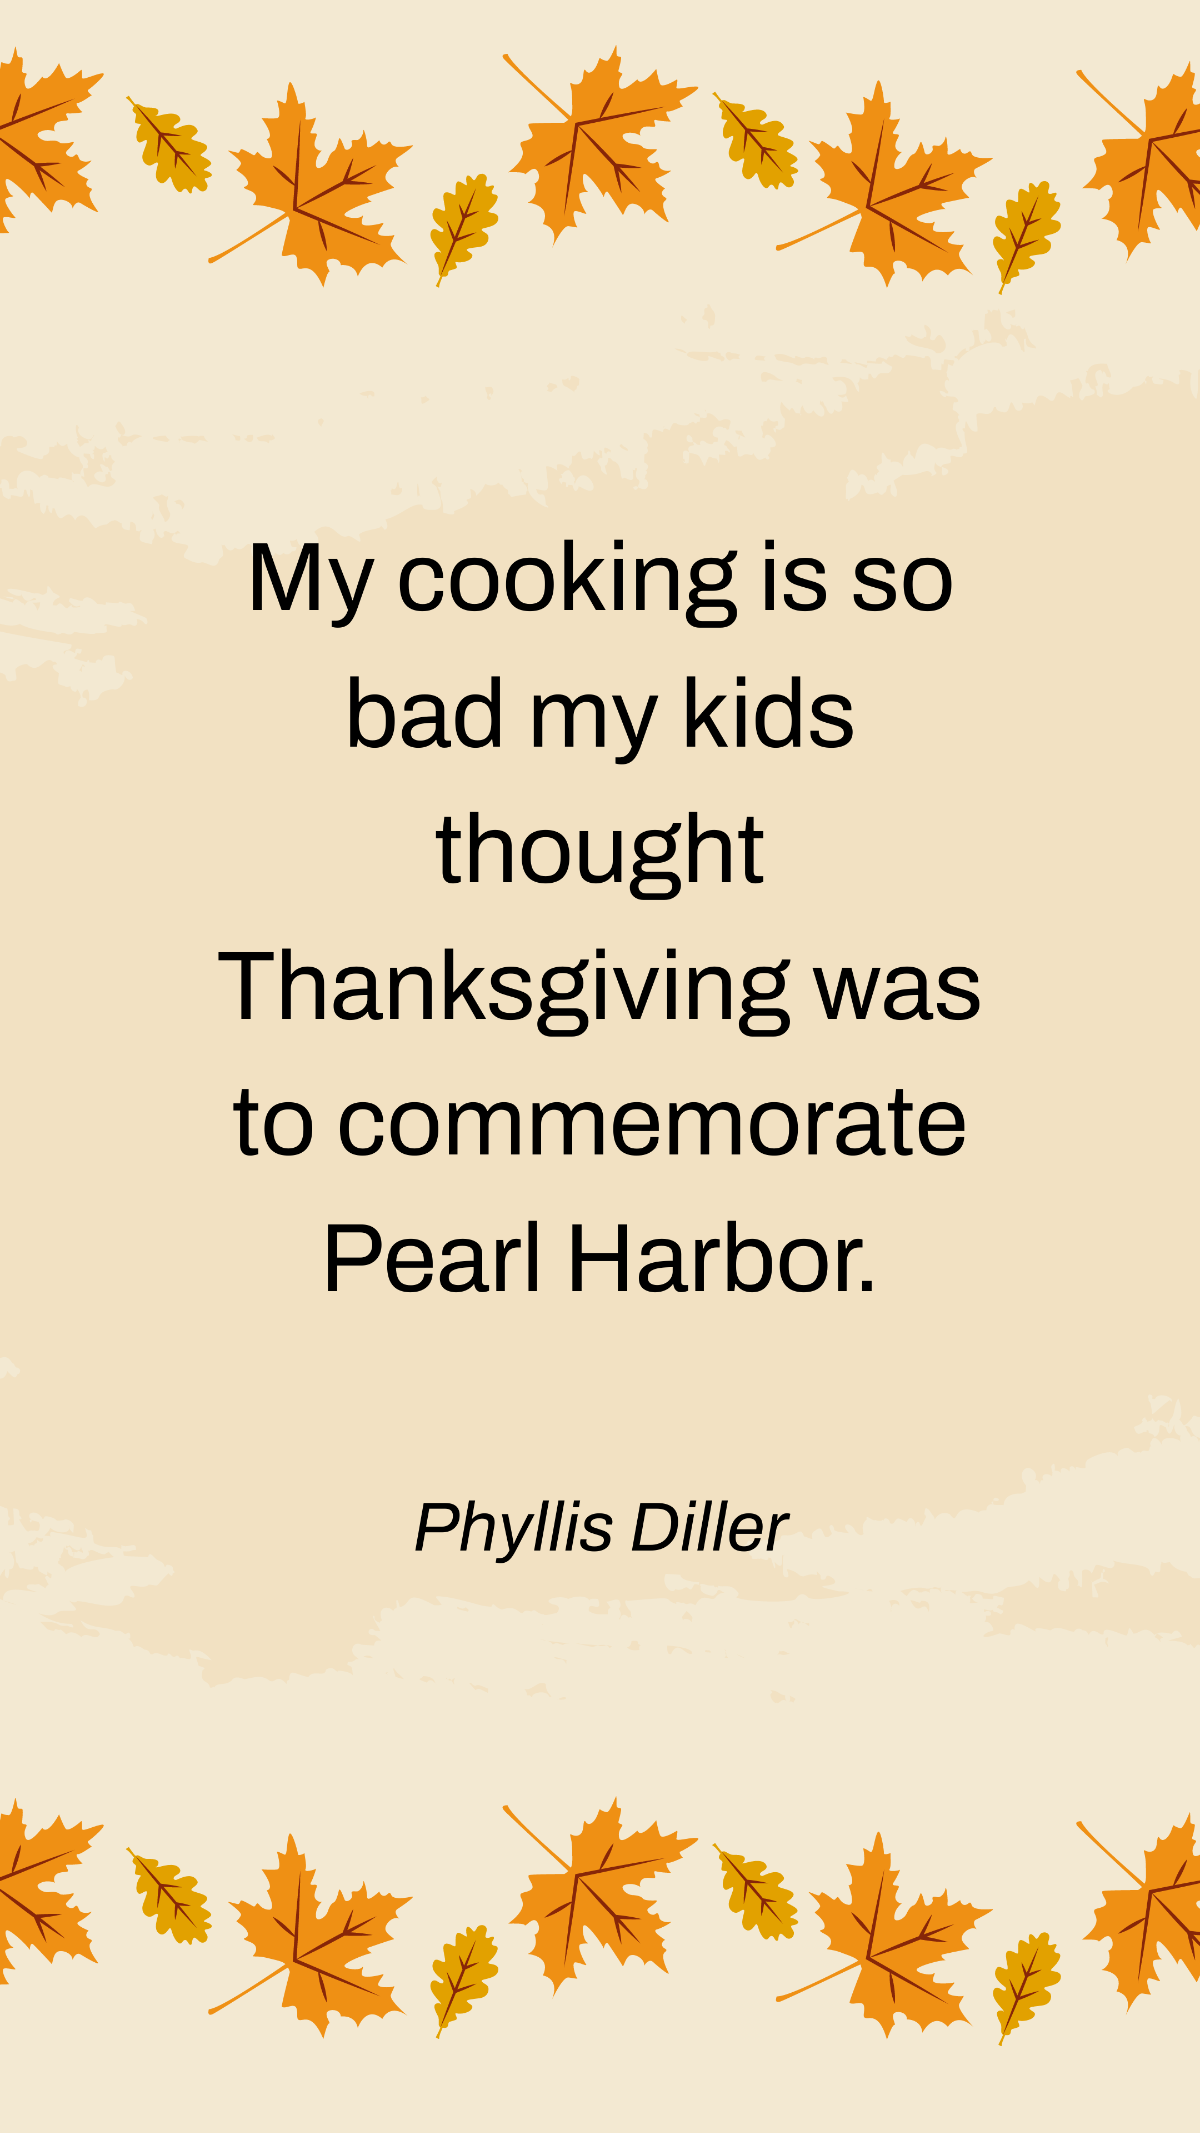 Phyllis Diller - My cooking is so bad my kids thought Thanksgiving was to commemorate Pearl Harbor. Template